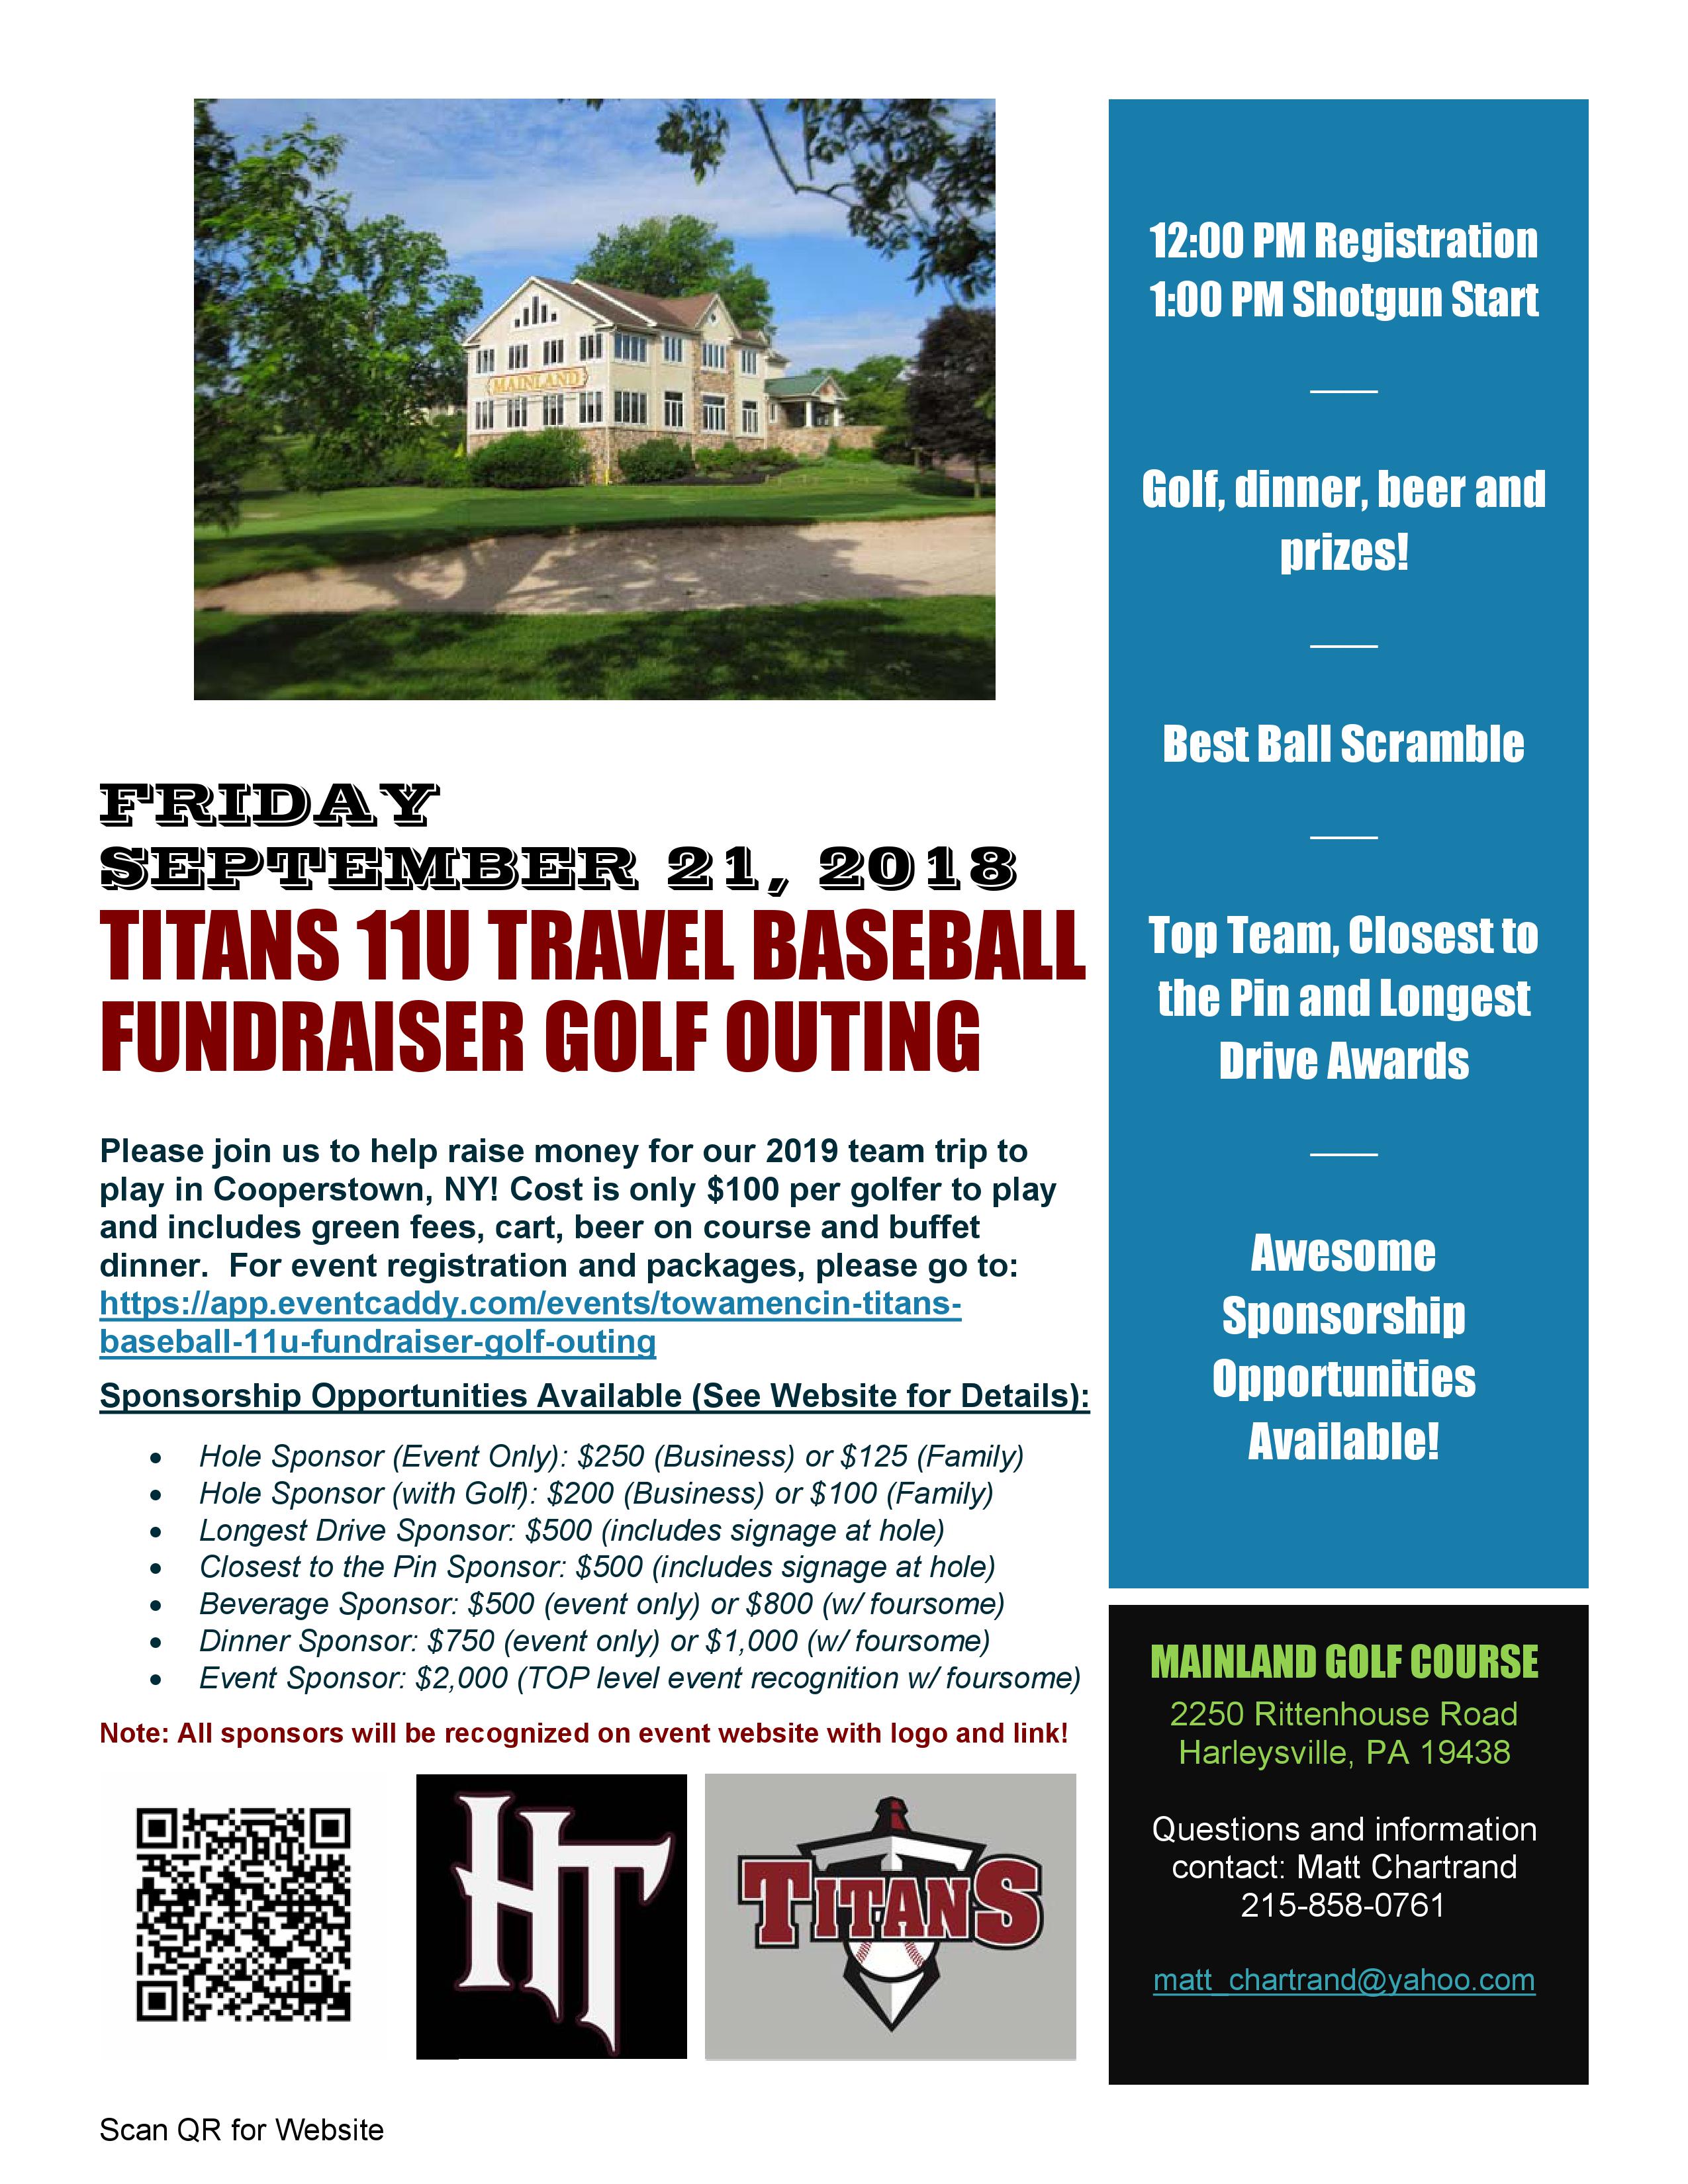 Golf Outing Flyer